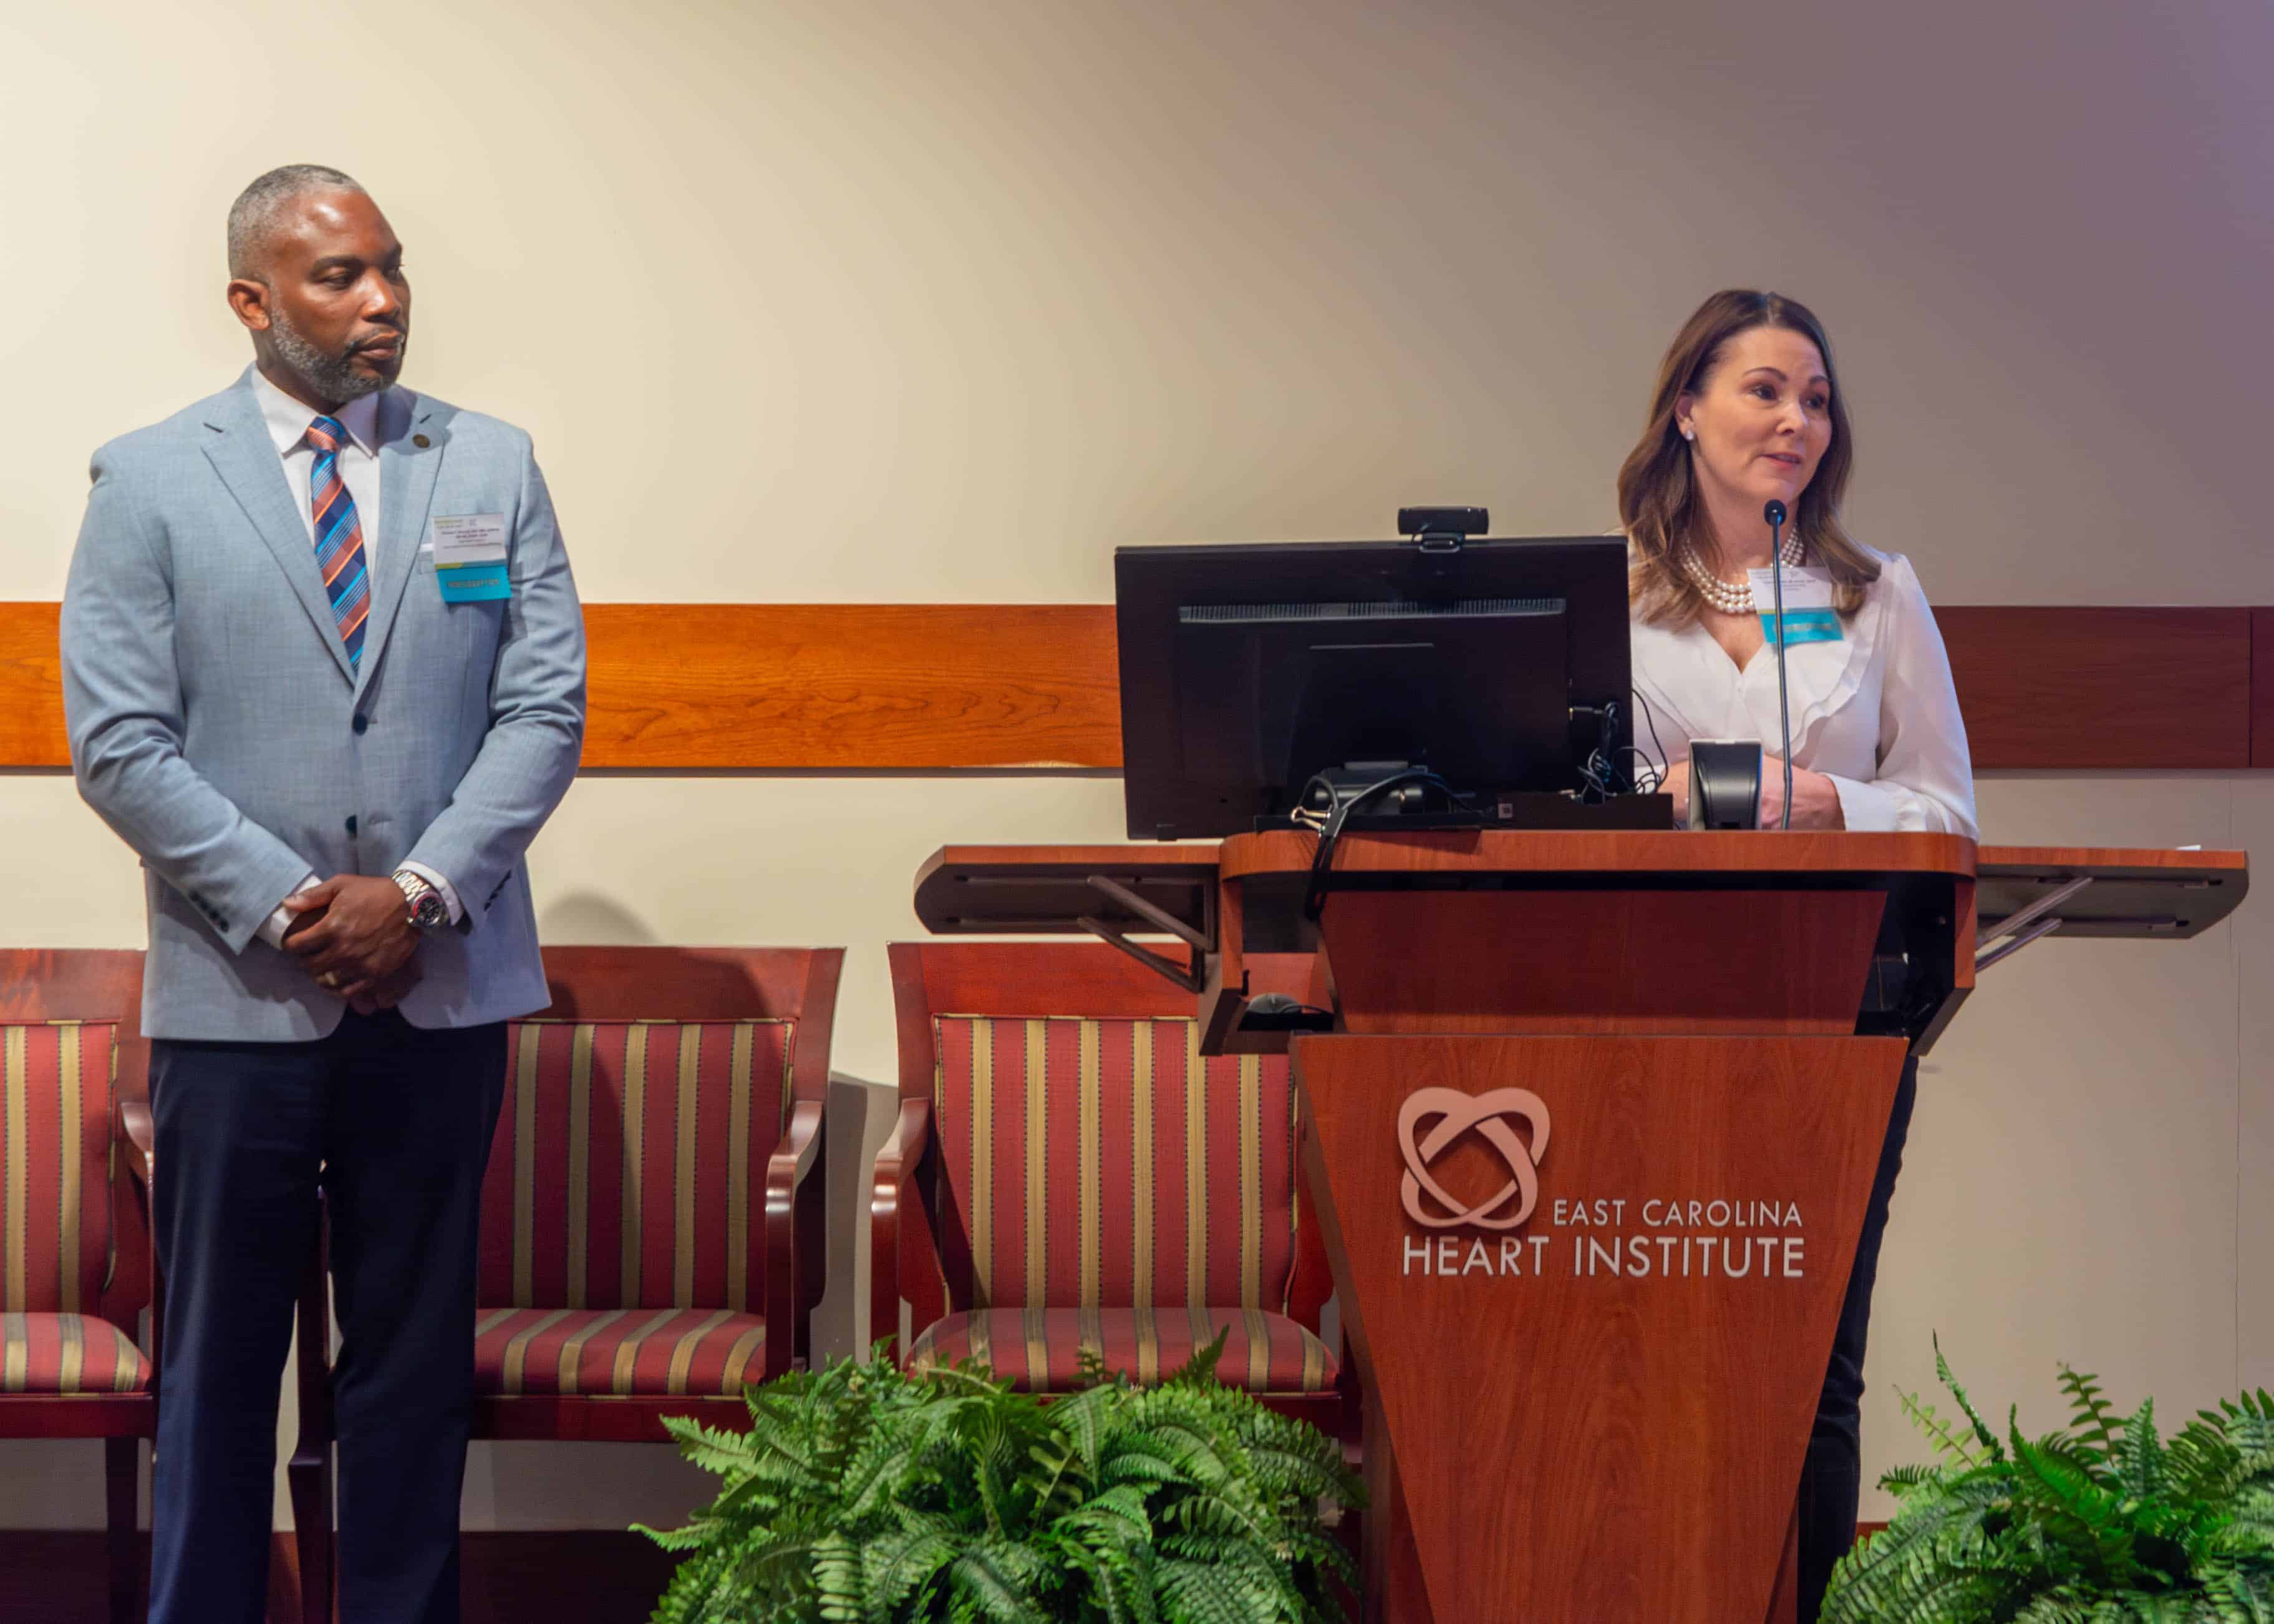 Collaborative Nurse Research Day encourages healthcare innovation in eastern North Carolina